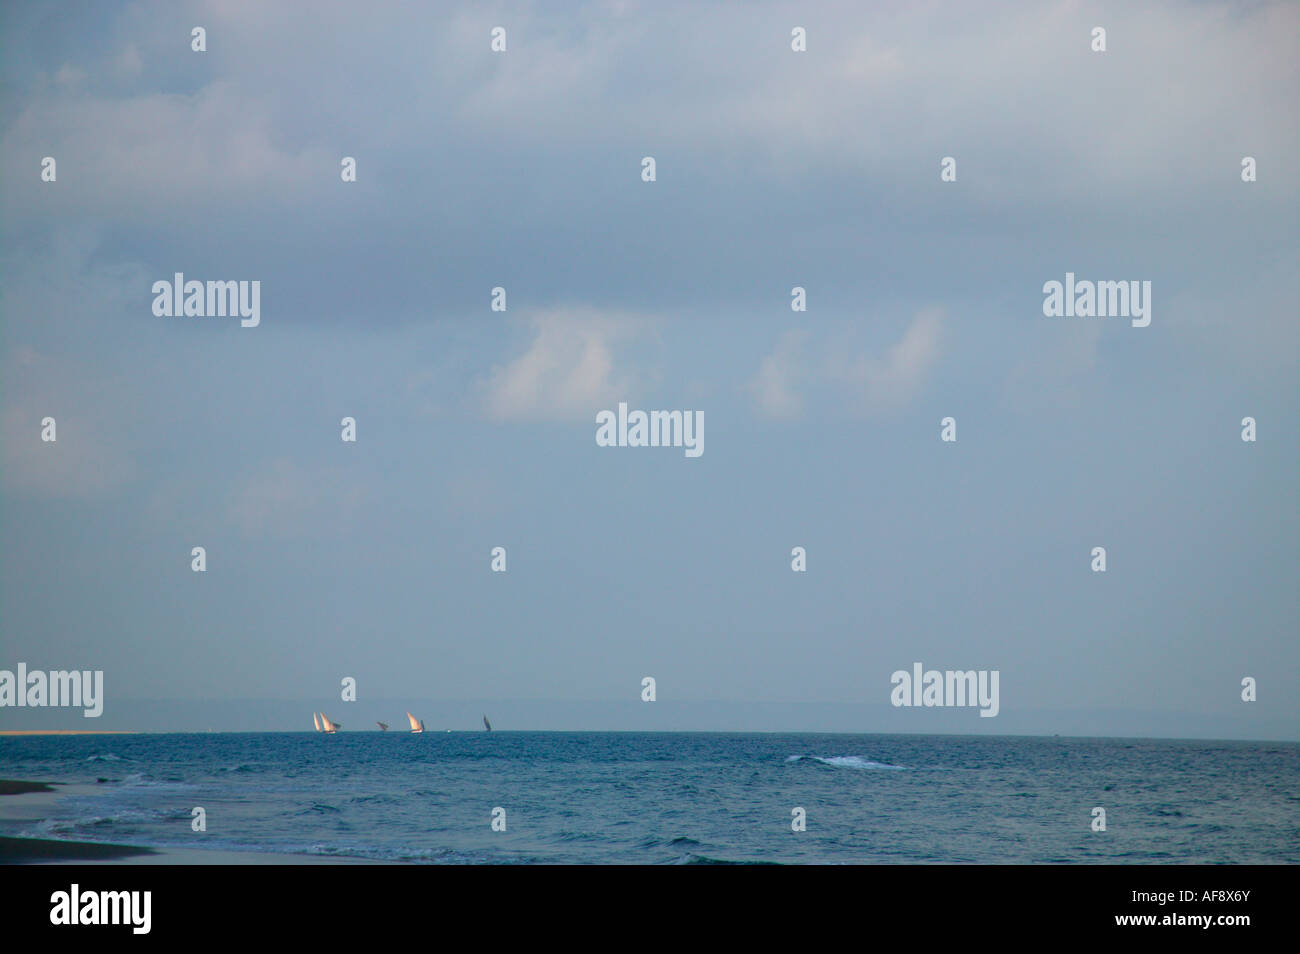 Distant view of dhows off the coast of Mozambique Stock Photo